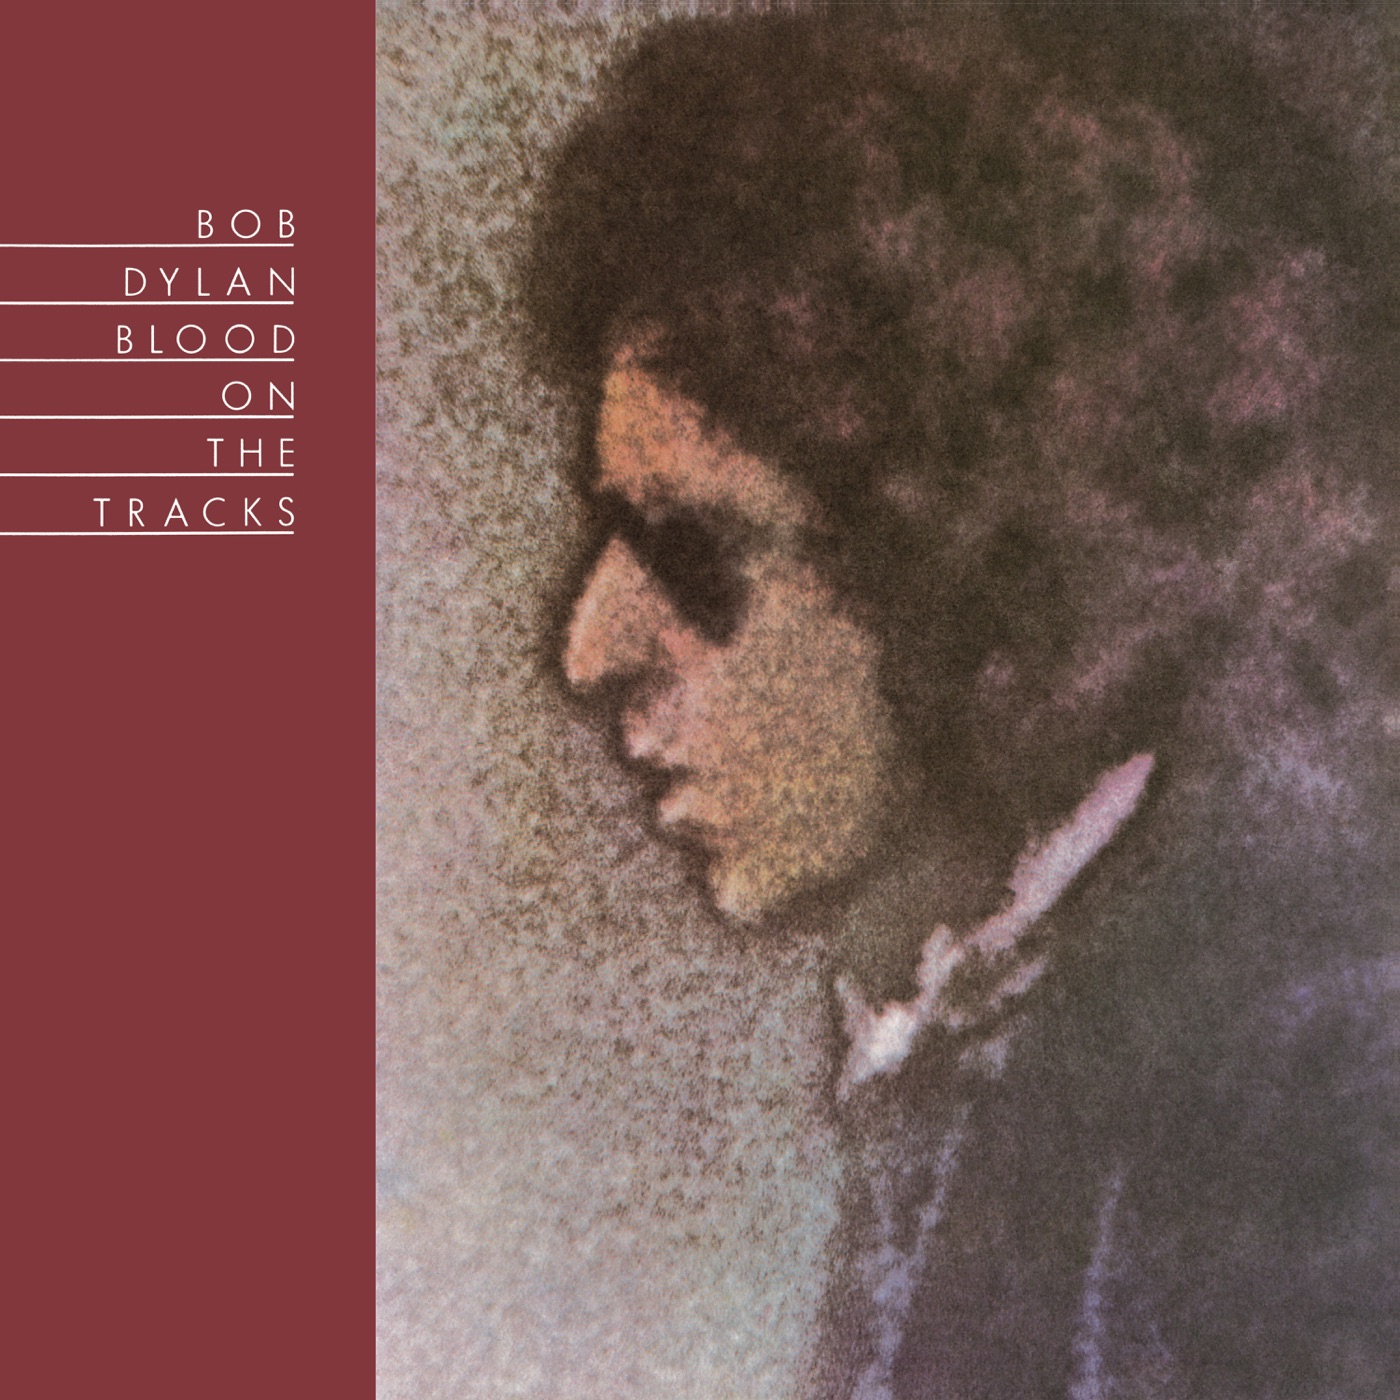 Blood On The Tracks by Bob Dylan